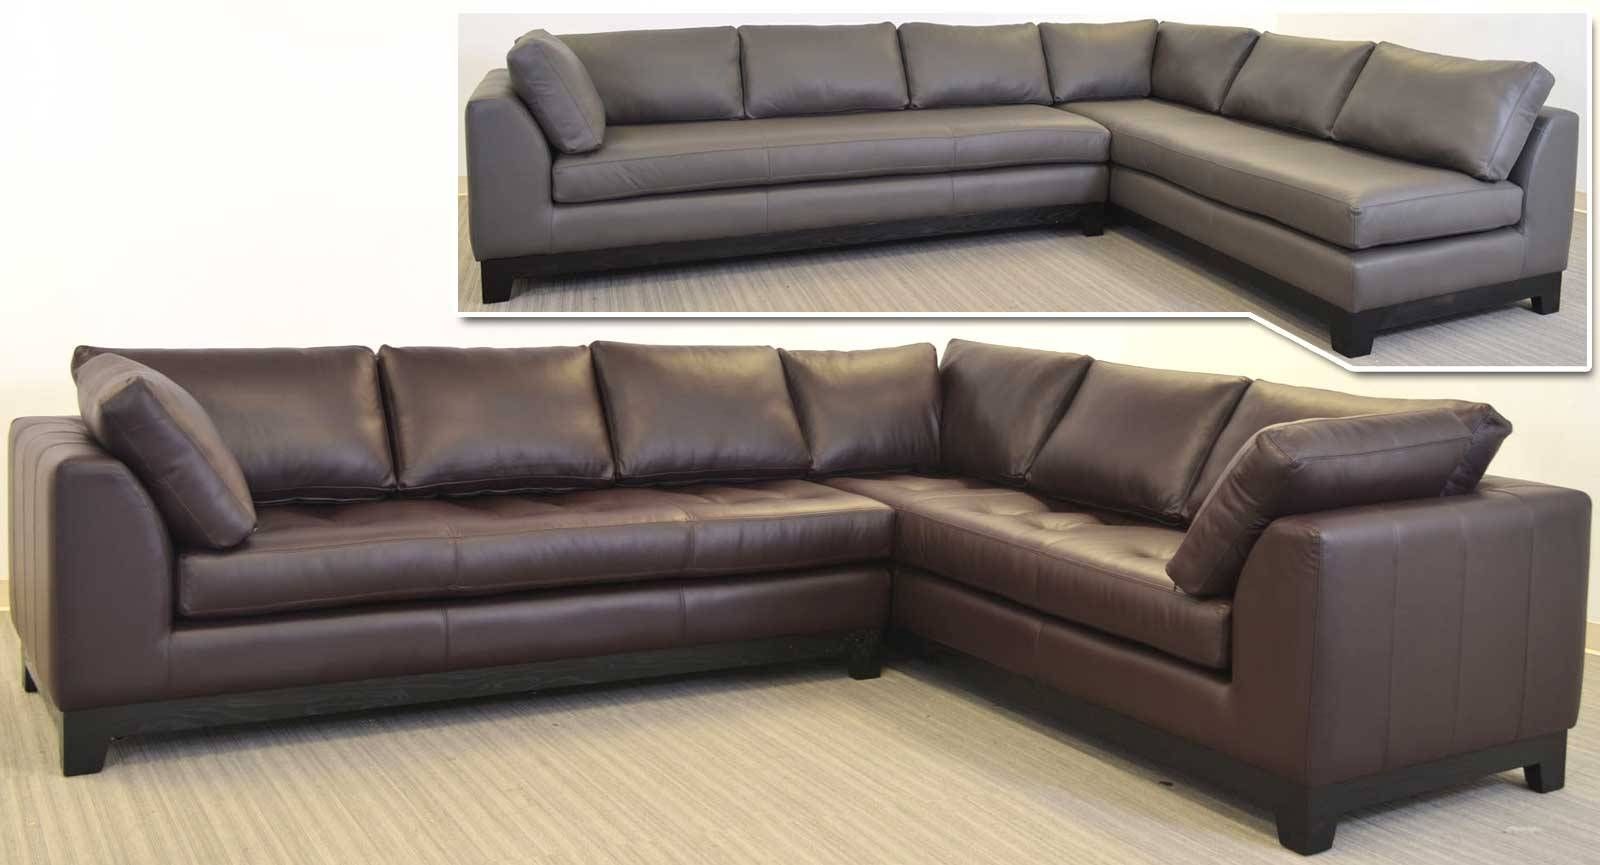 best cushion for leather sofa